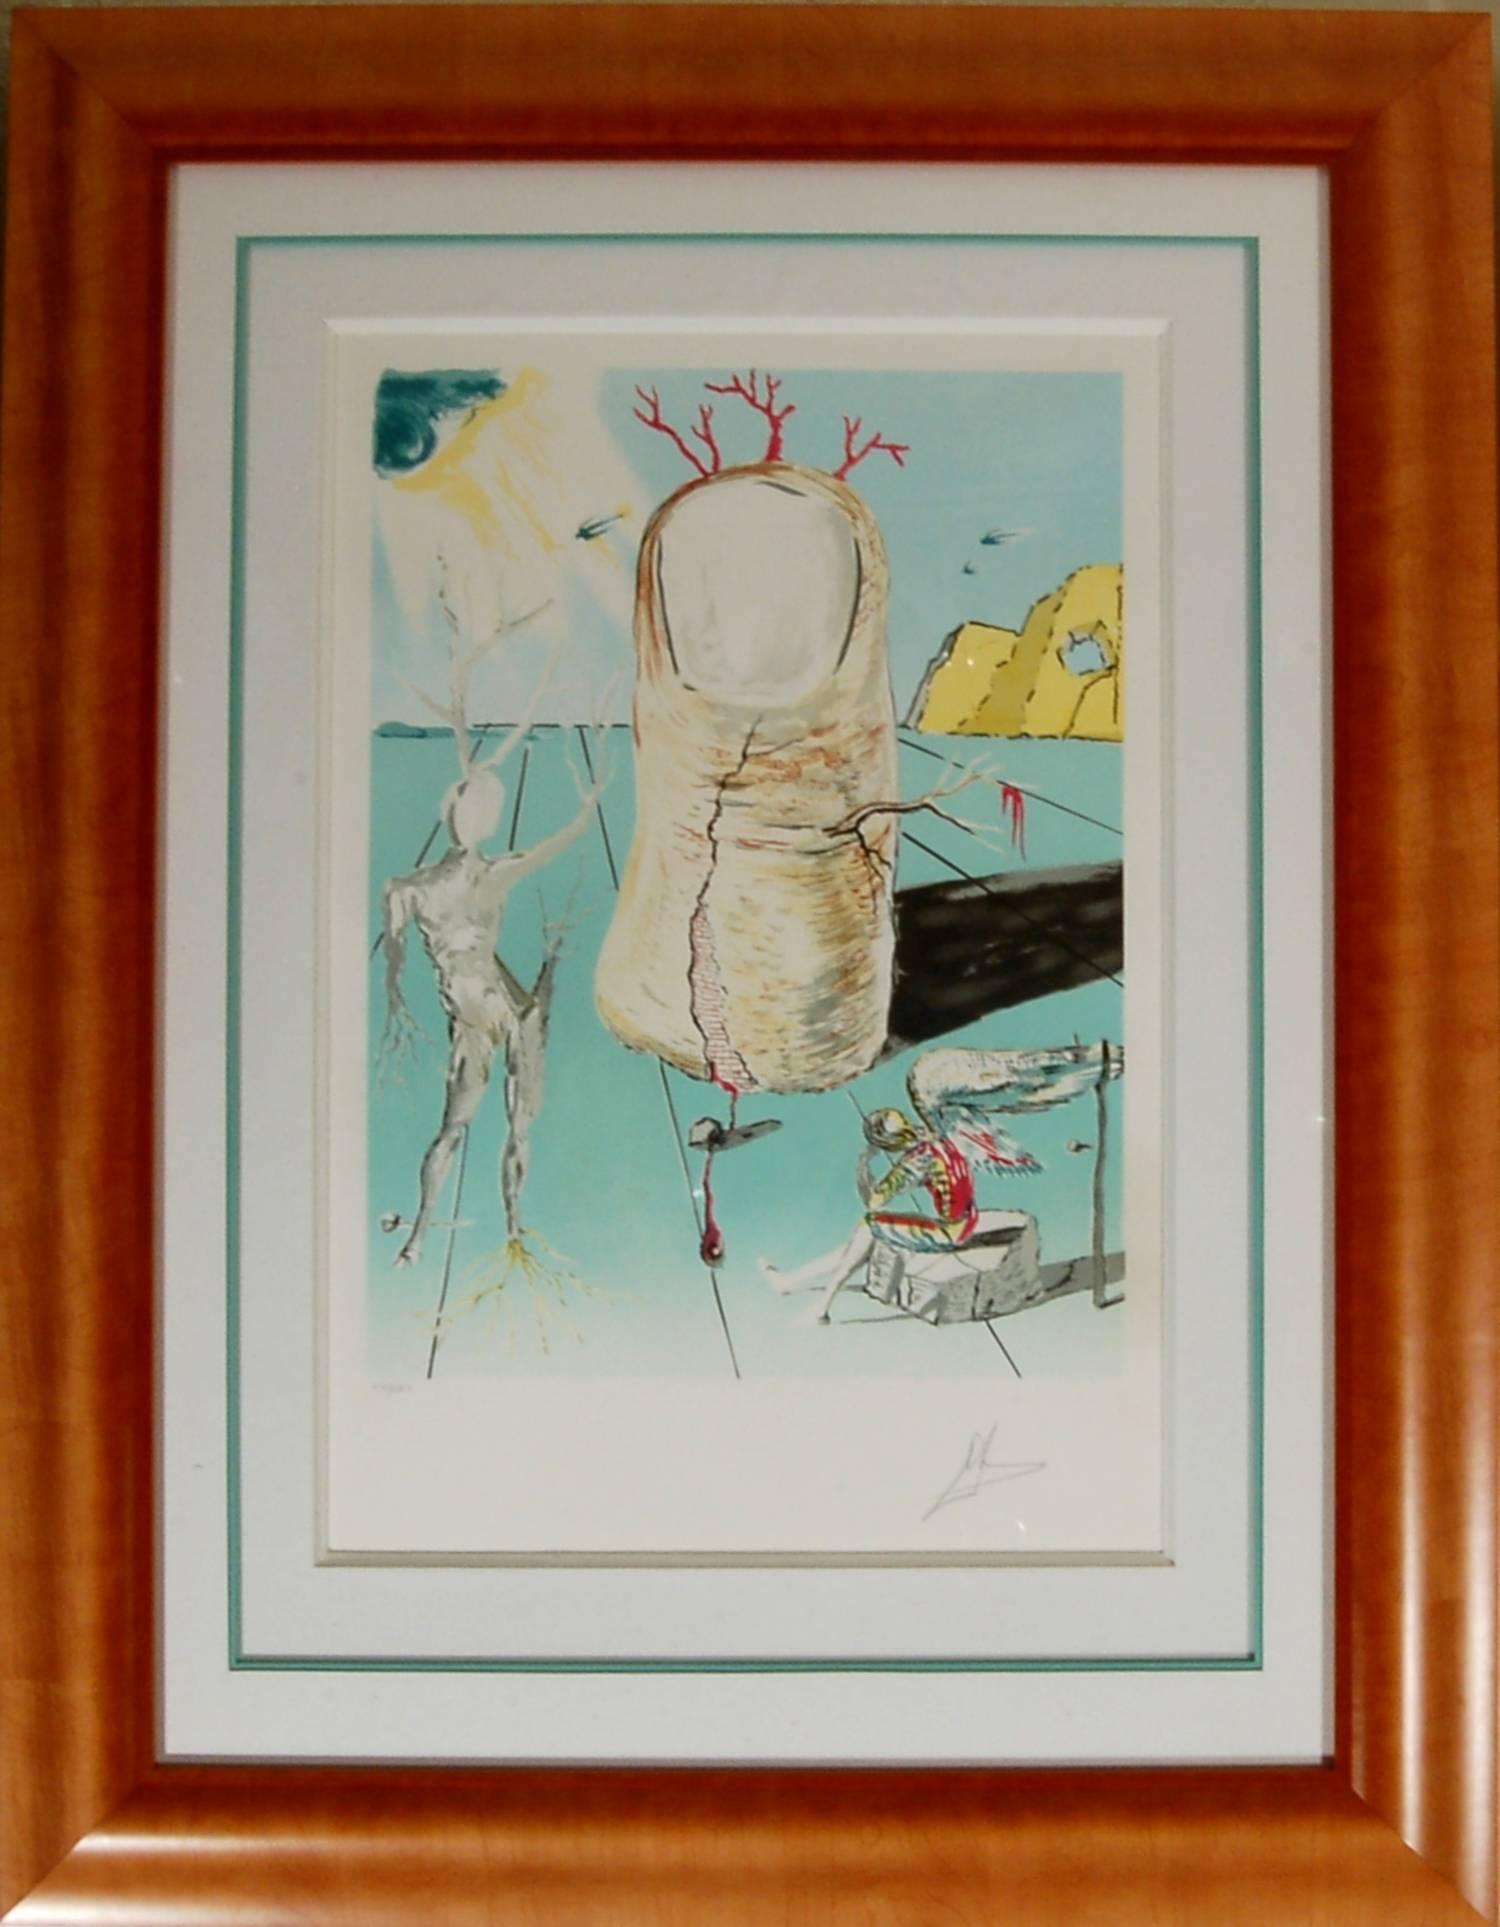 Salvador Dalí Figurative Print - The Thumb, The Vision of the Angel of Cap Creus